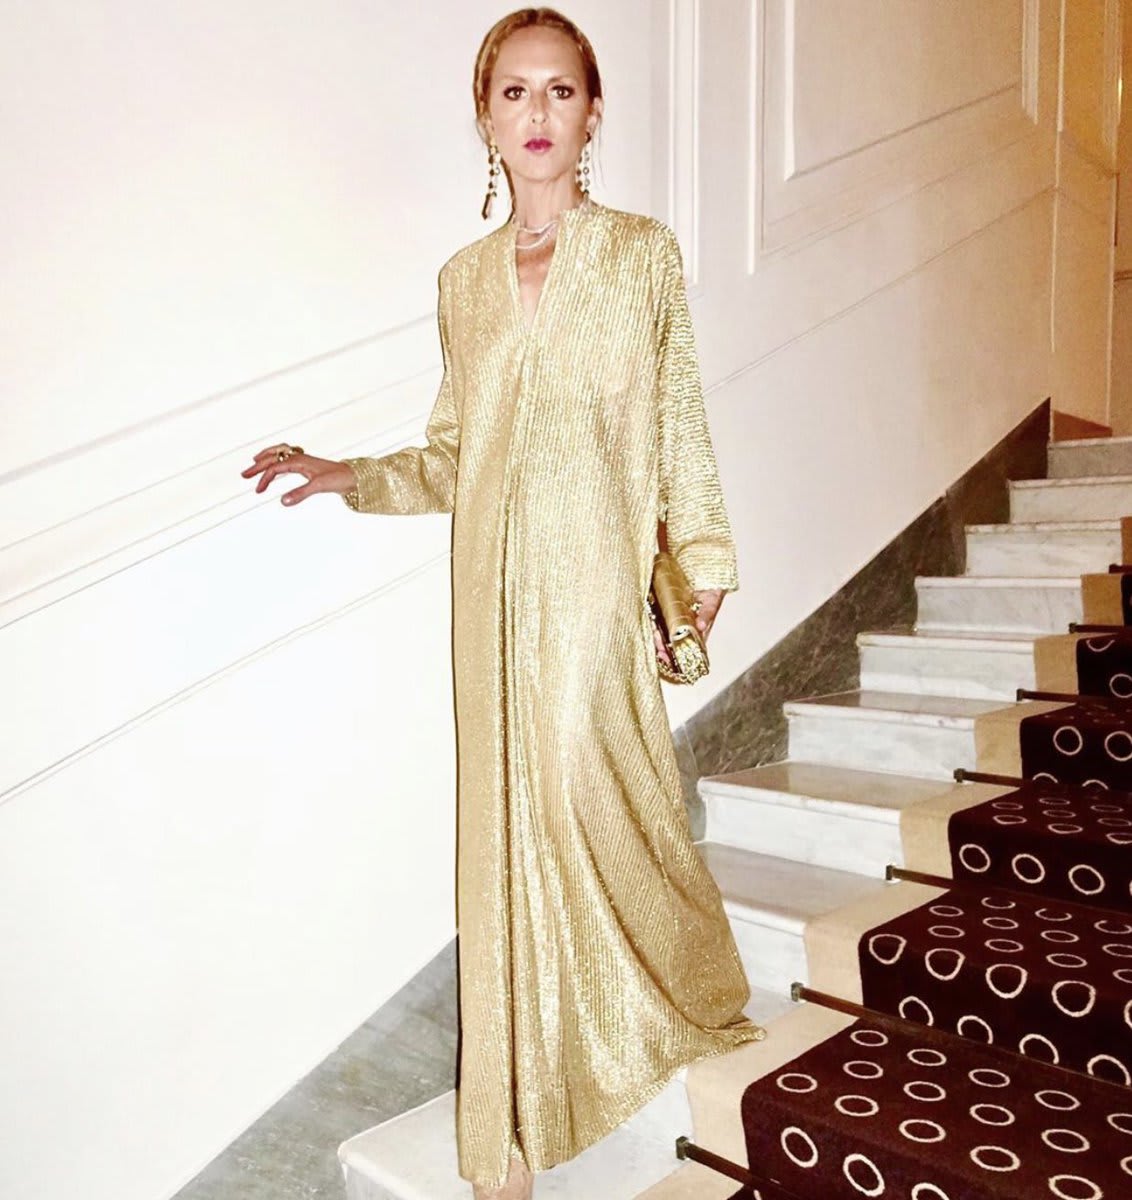 My last night in Capri called for gold vintage Halston ✨ glamour xoRZ